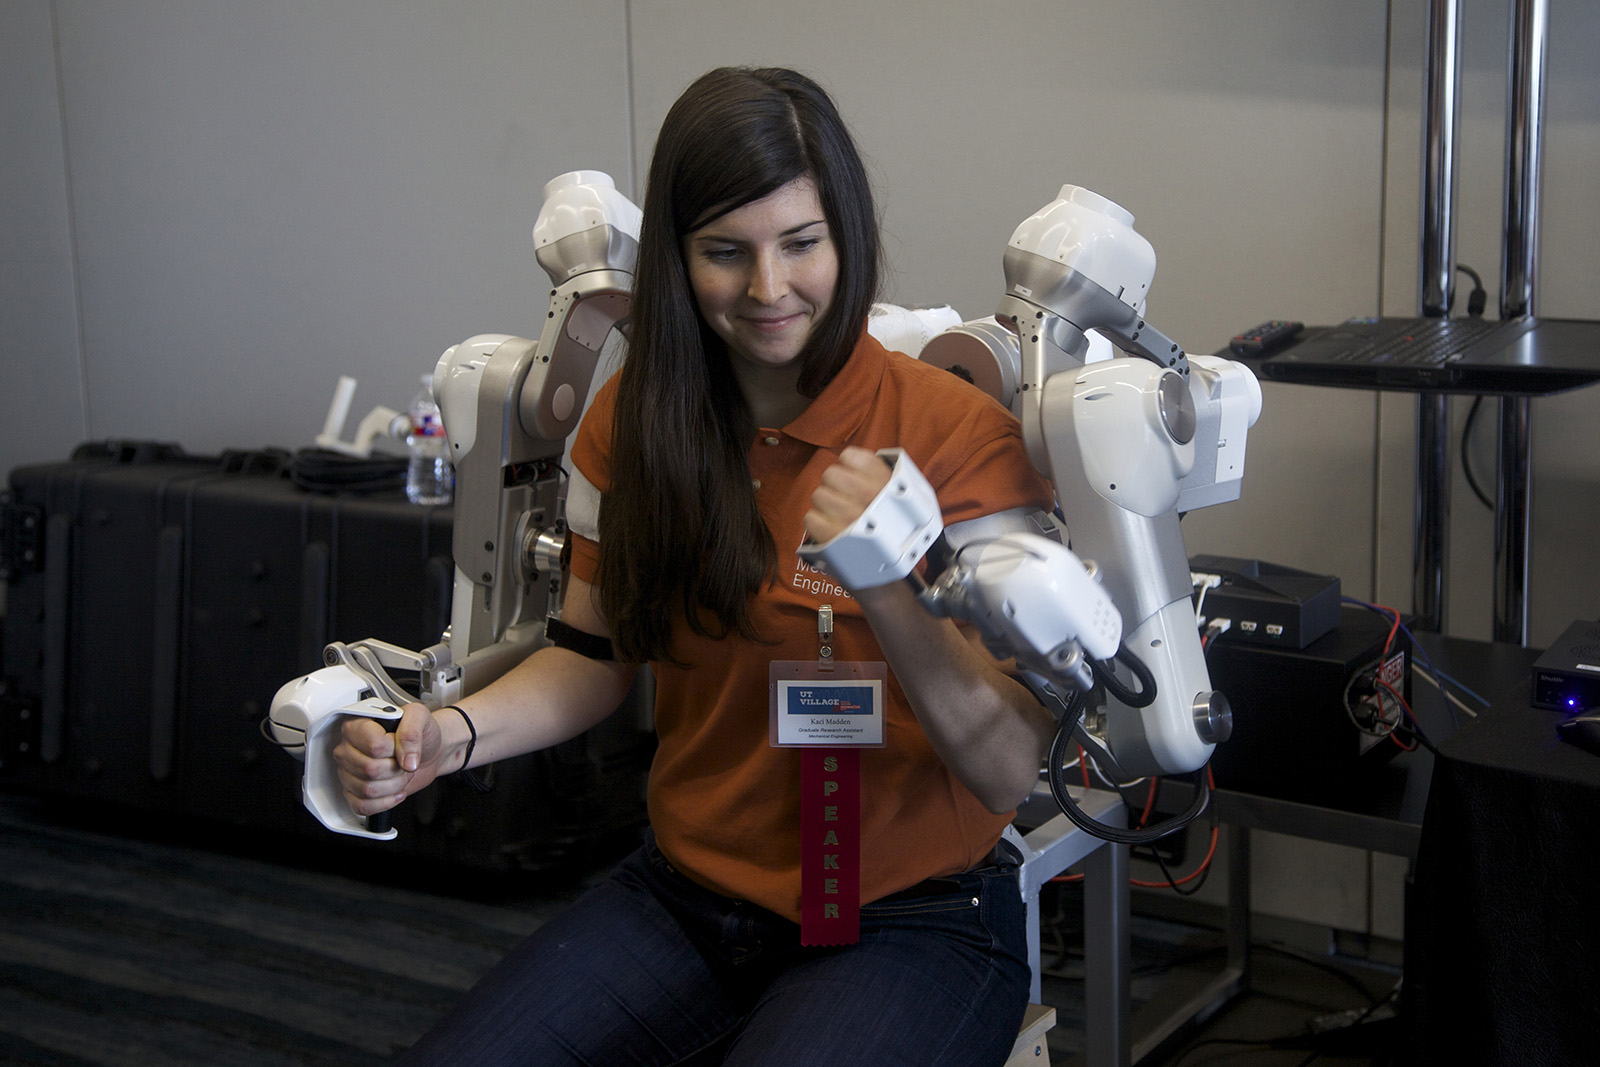 student wearing a UT Austin t-shirt operating robotic arms